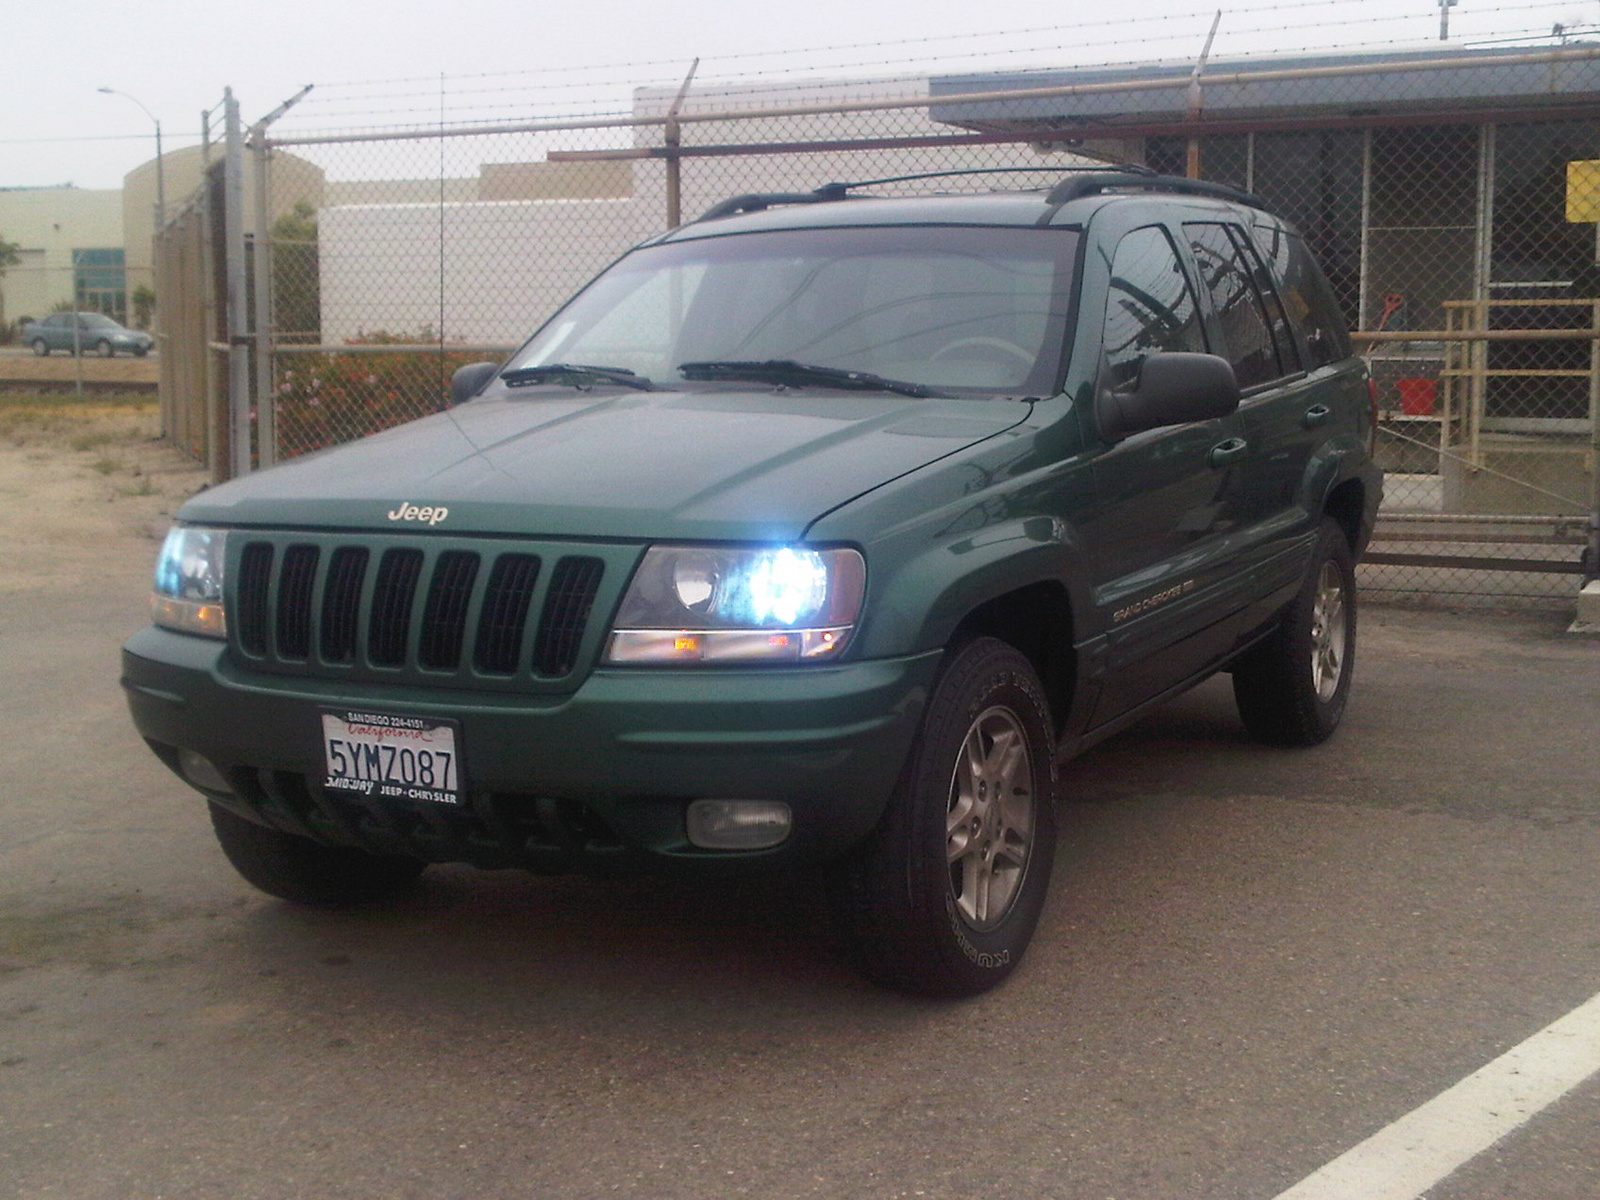 1999 Jeep grand cherokee questions #5